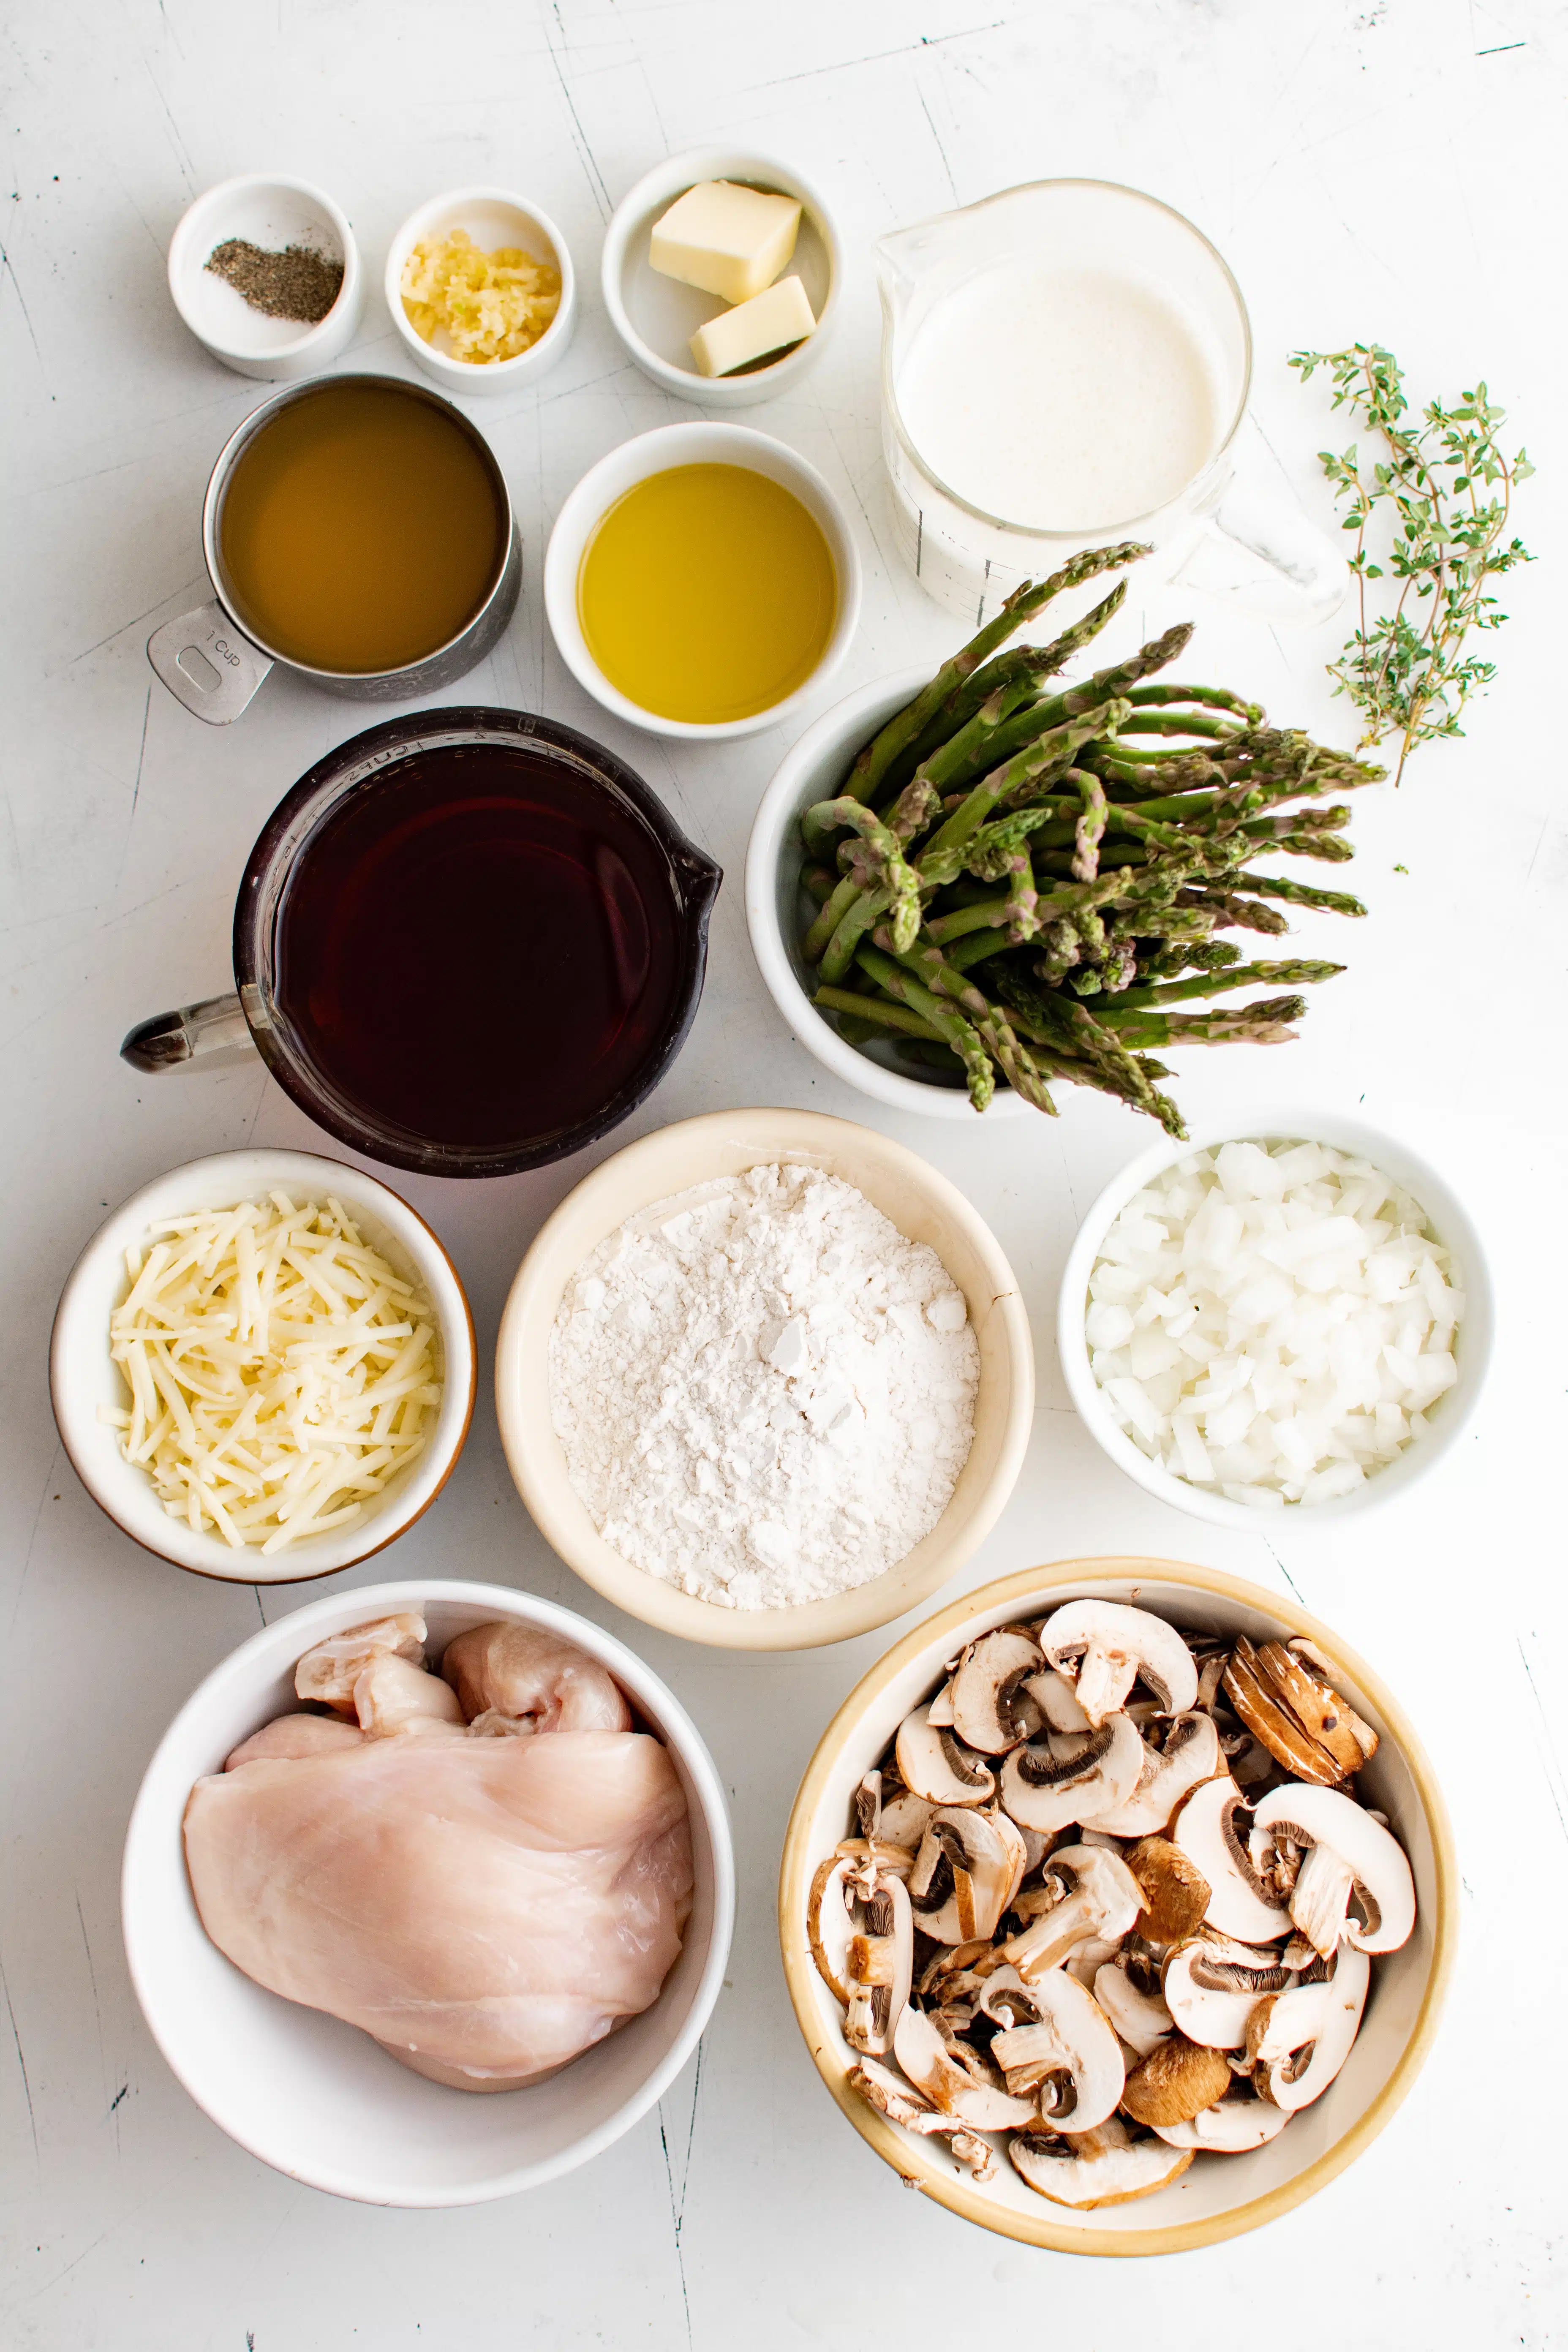 Ingredients needed to make creamy chicken madeira set aside in small serving dishes.